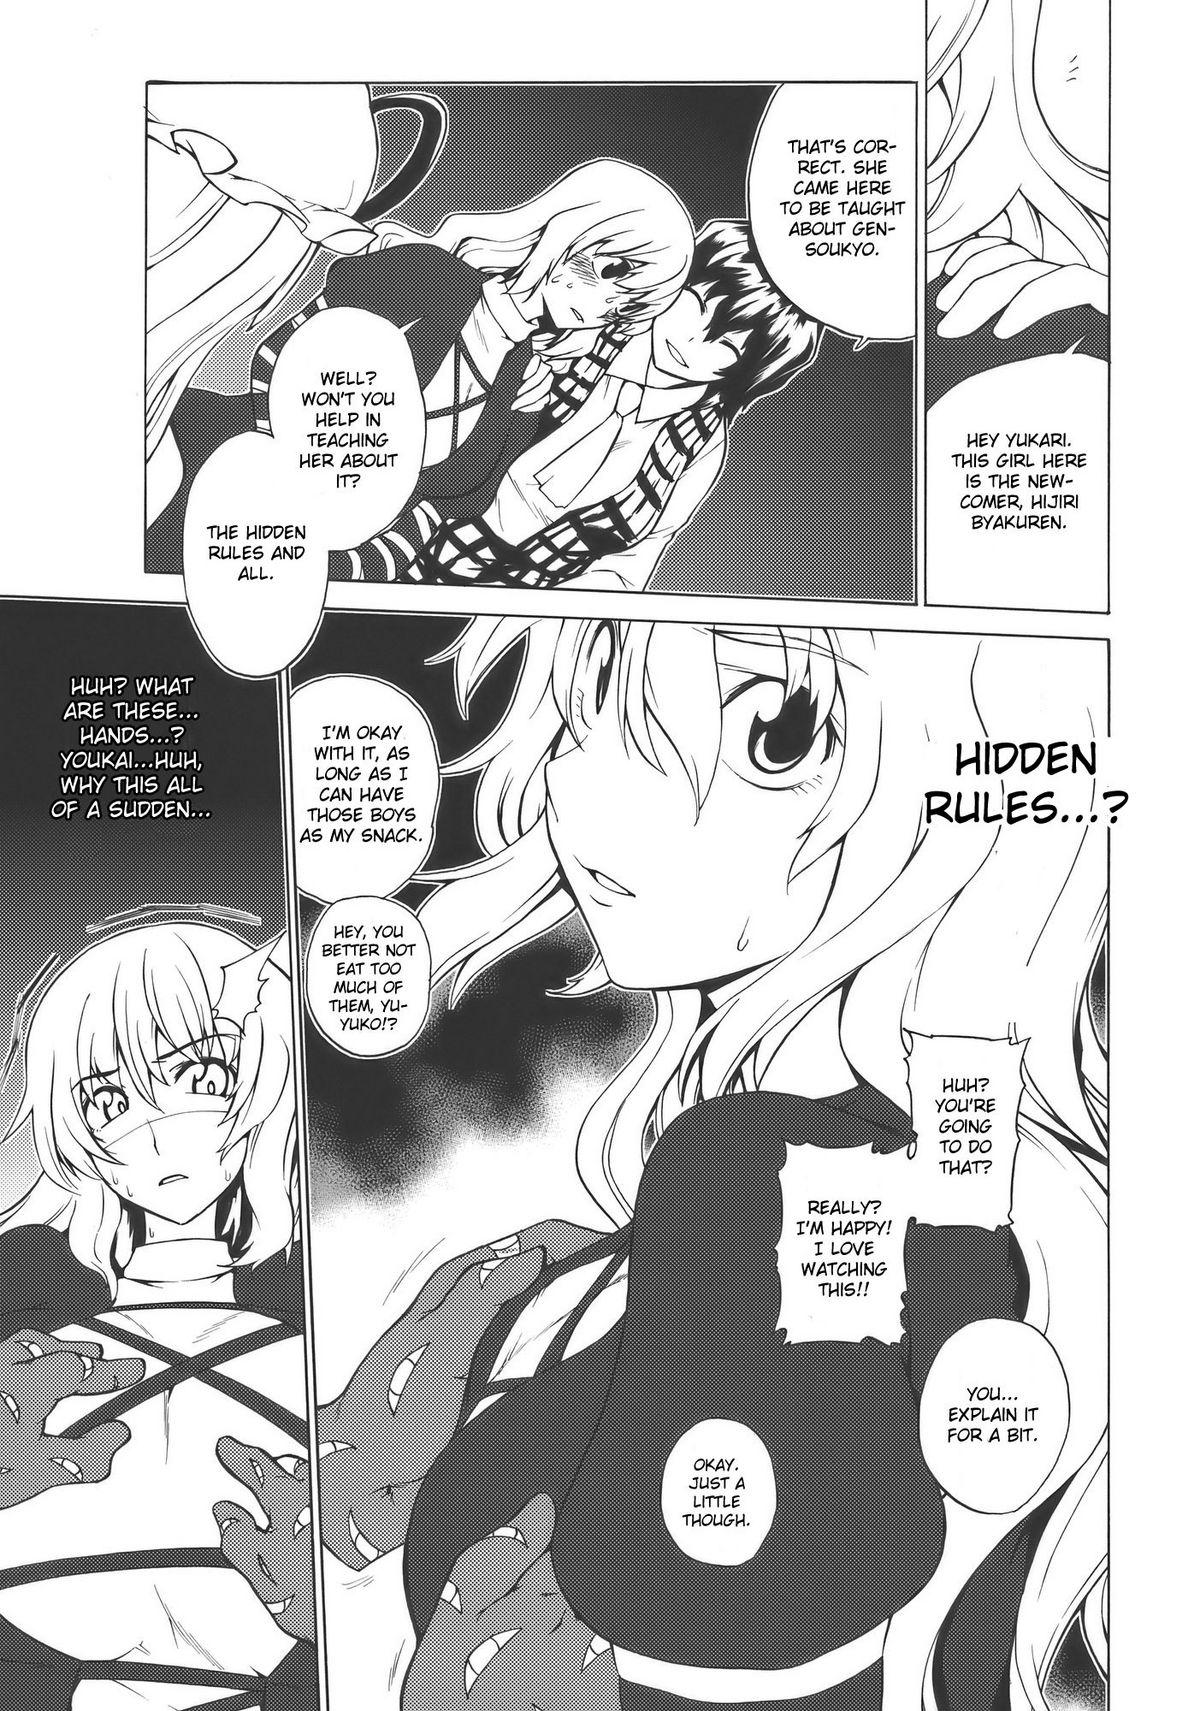 Spy Playing Gensoukyou Now - Touhou project Freeteenporn - Page 9